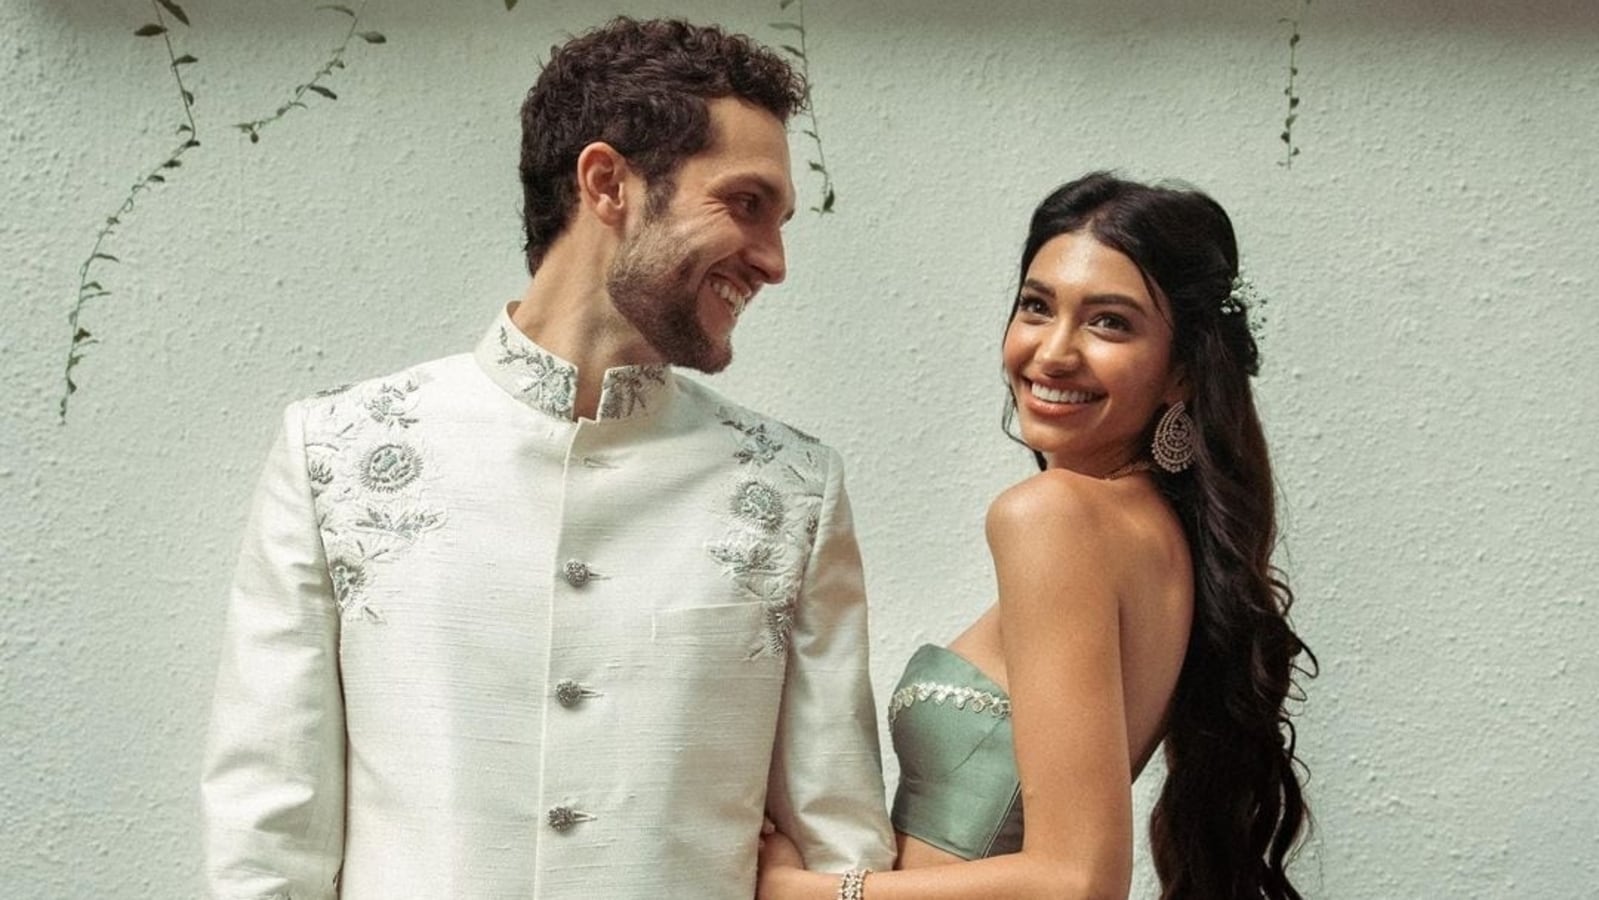 Alanna Panday and her fiance Ivor McCray reveal why Ananya Panday didn’t attend their engagement party